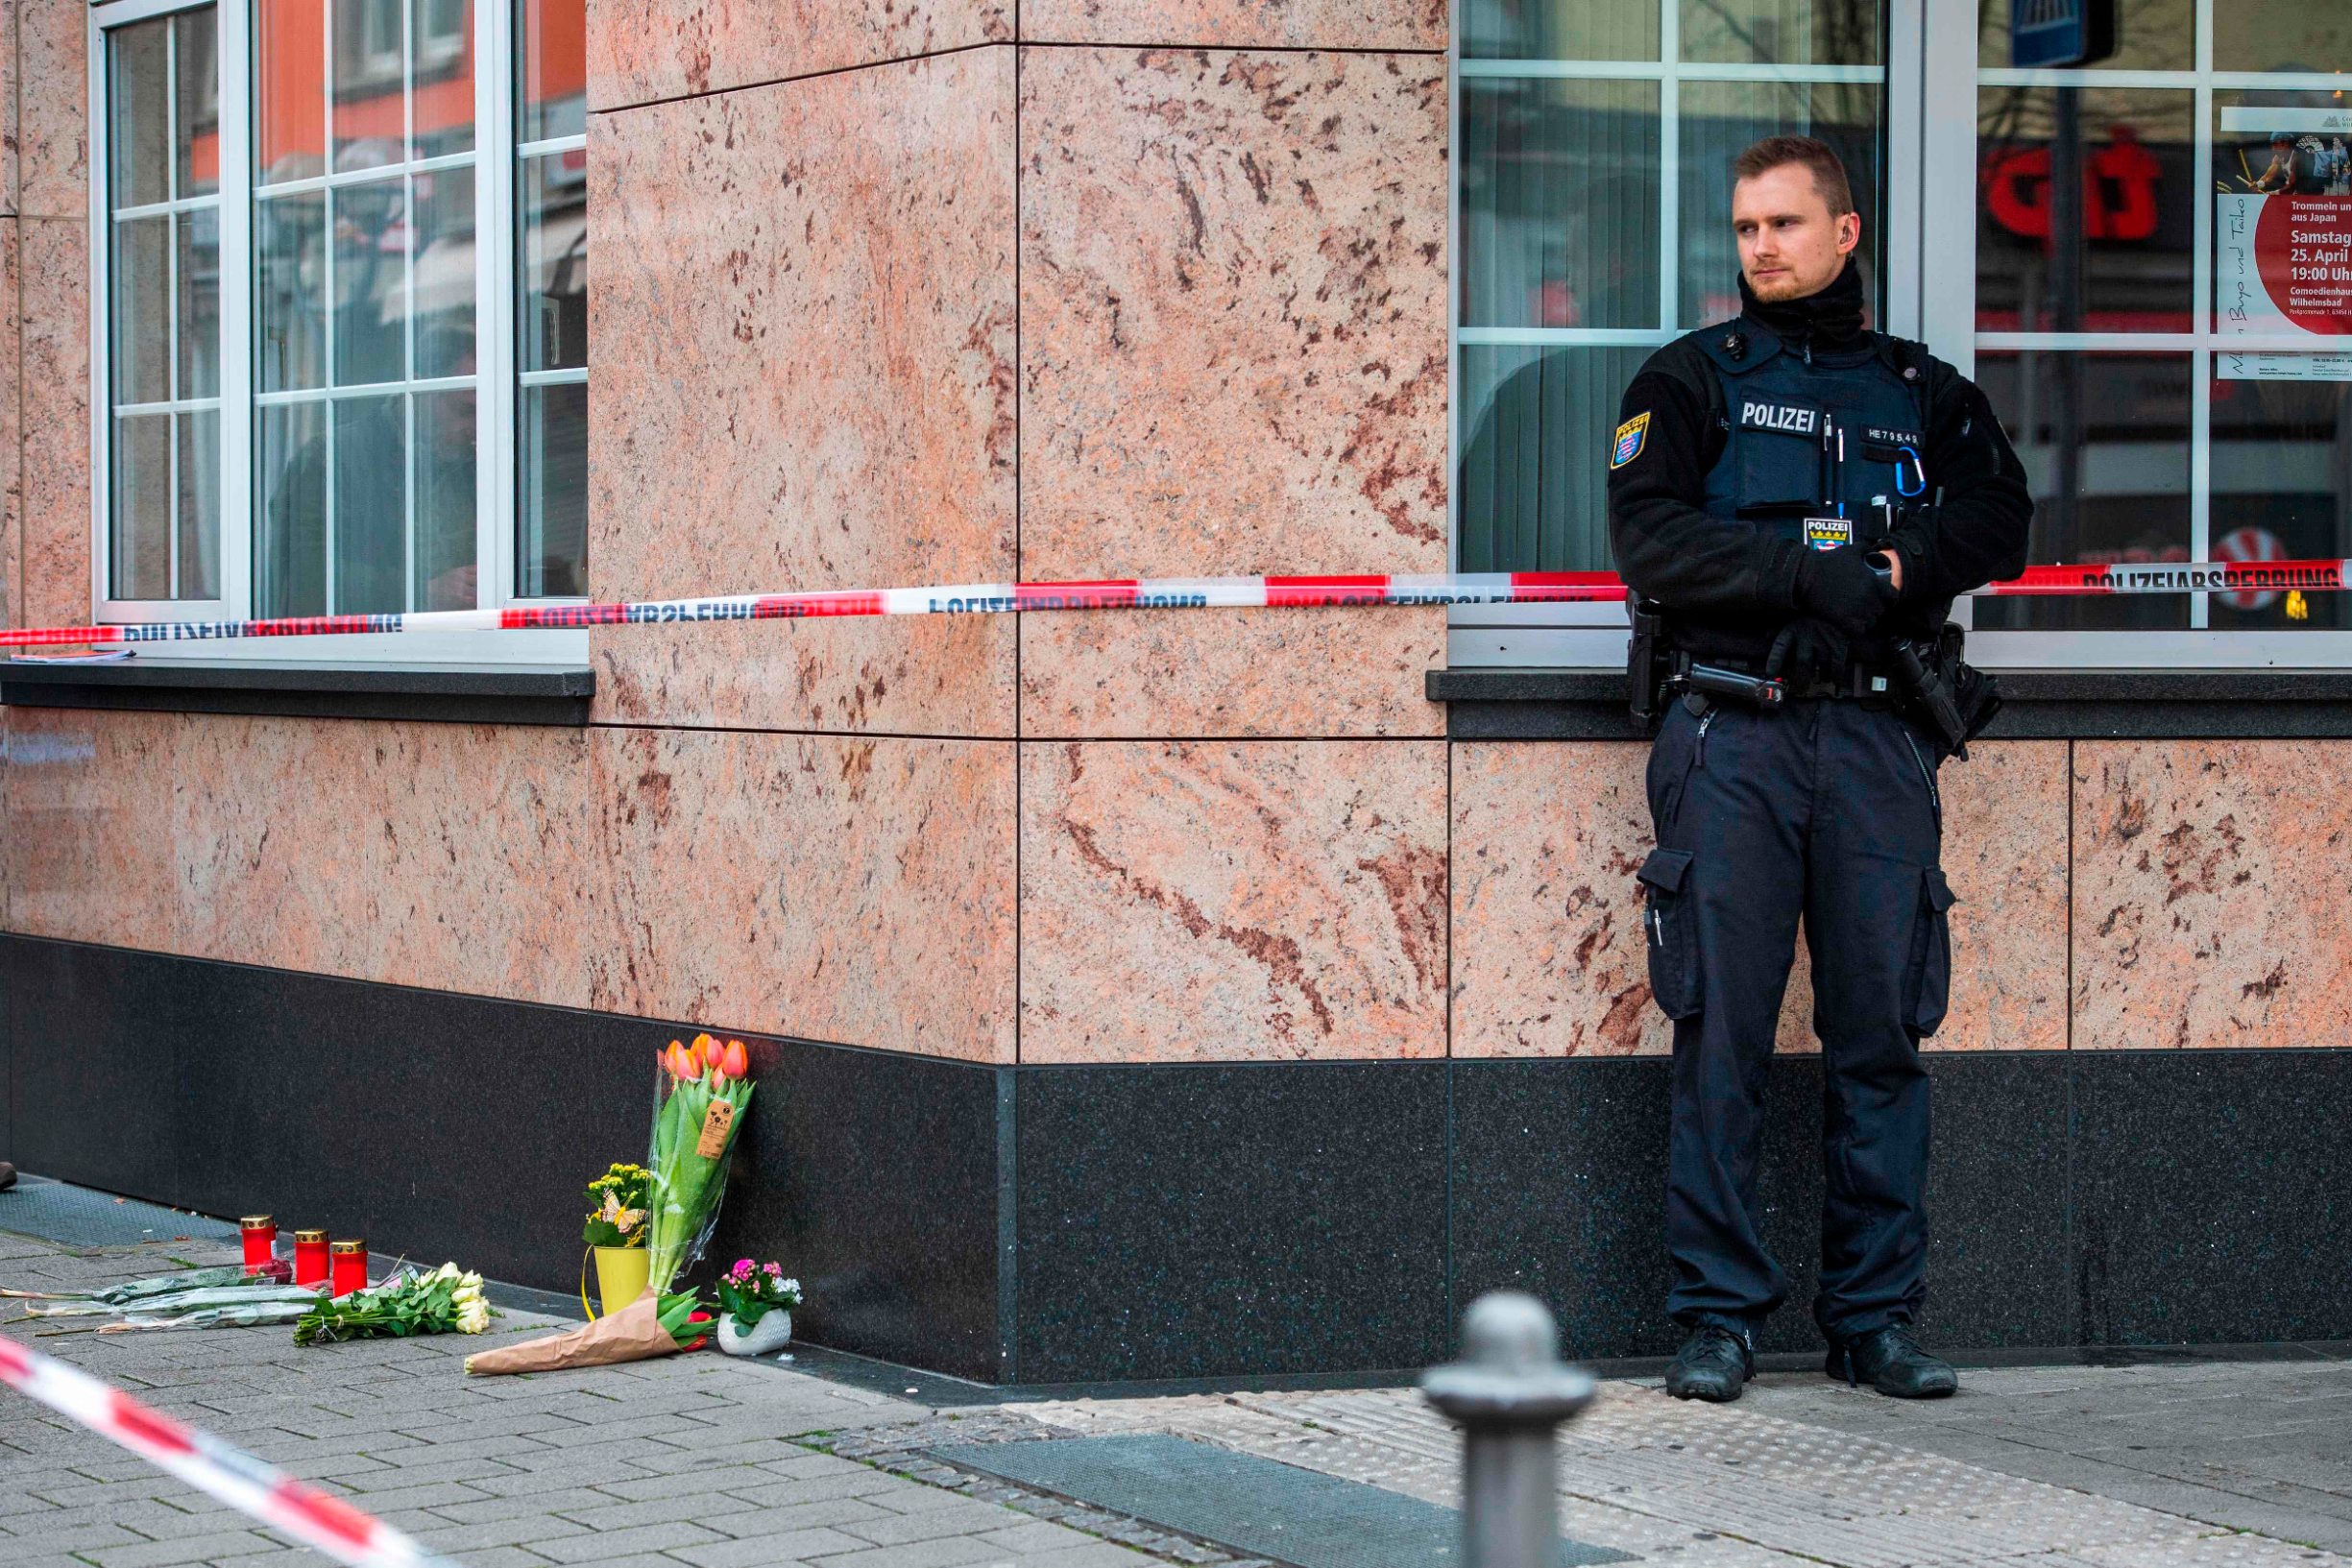 A police officer stands guard beside candles and flowers near one of the shooting targets, on February 20, 2020, at the Heumarkt in the centre of Hanau, near Frankfurt am Main, western Germany, after at least nine people were killed in two shootings late on February 19, 2020. - The suspect in two shootings in Germany that killed at least nine people was found dead at home, police said on February 20, 2020. At least nine people were killed in two shootings late on February 19 in Hanau, near the German city of Frankfurt. (Photo by Thomas Lohnes / AFP)